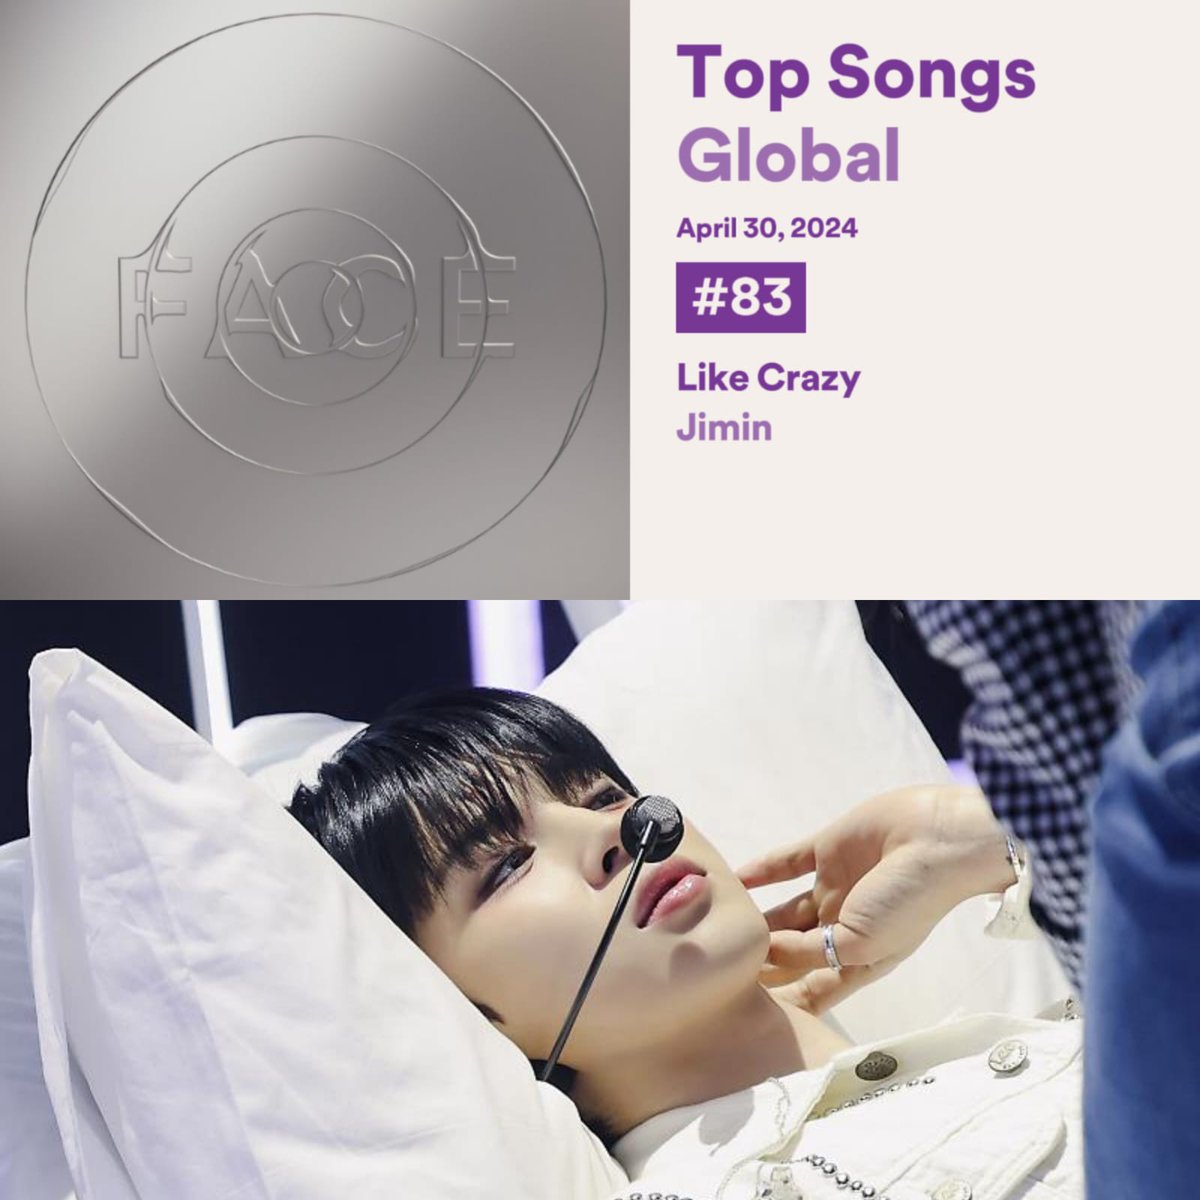 “Like Crazy” remains the highest charting solo song by a K-soloist as it charts at #83 on Spotify Daily Top Songs Global on April 30, 2024. 🌎 The song has garnered 1,880,585 (+48,935) daily streams.  LET'S BRING LIKE CRAZY BACK TO 2 MILLION STREAMS 💪